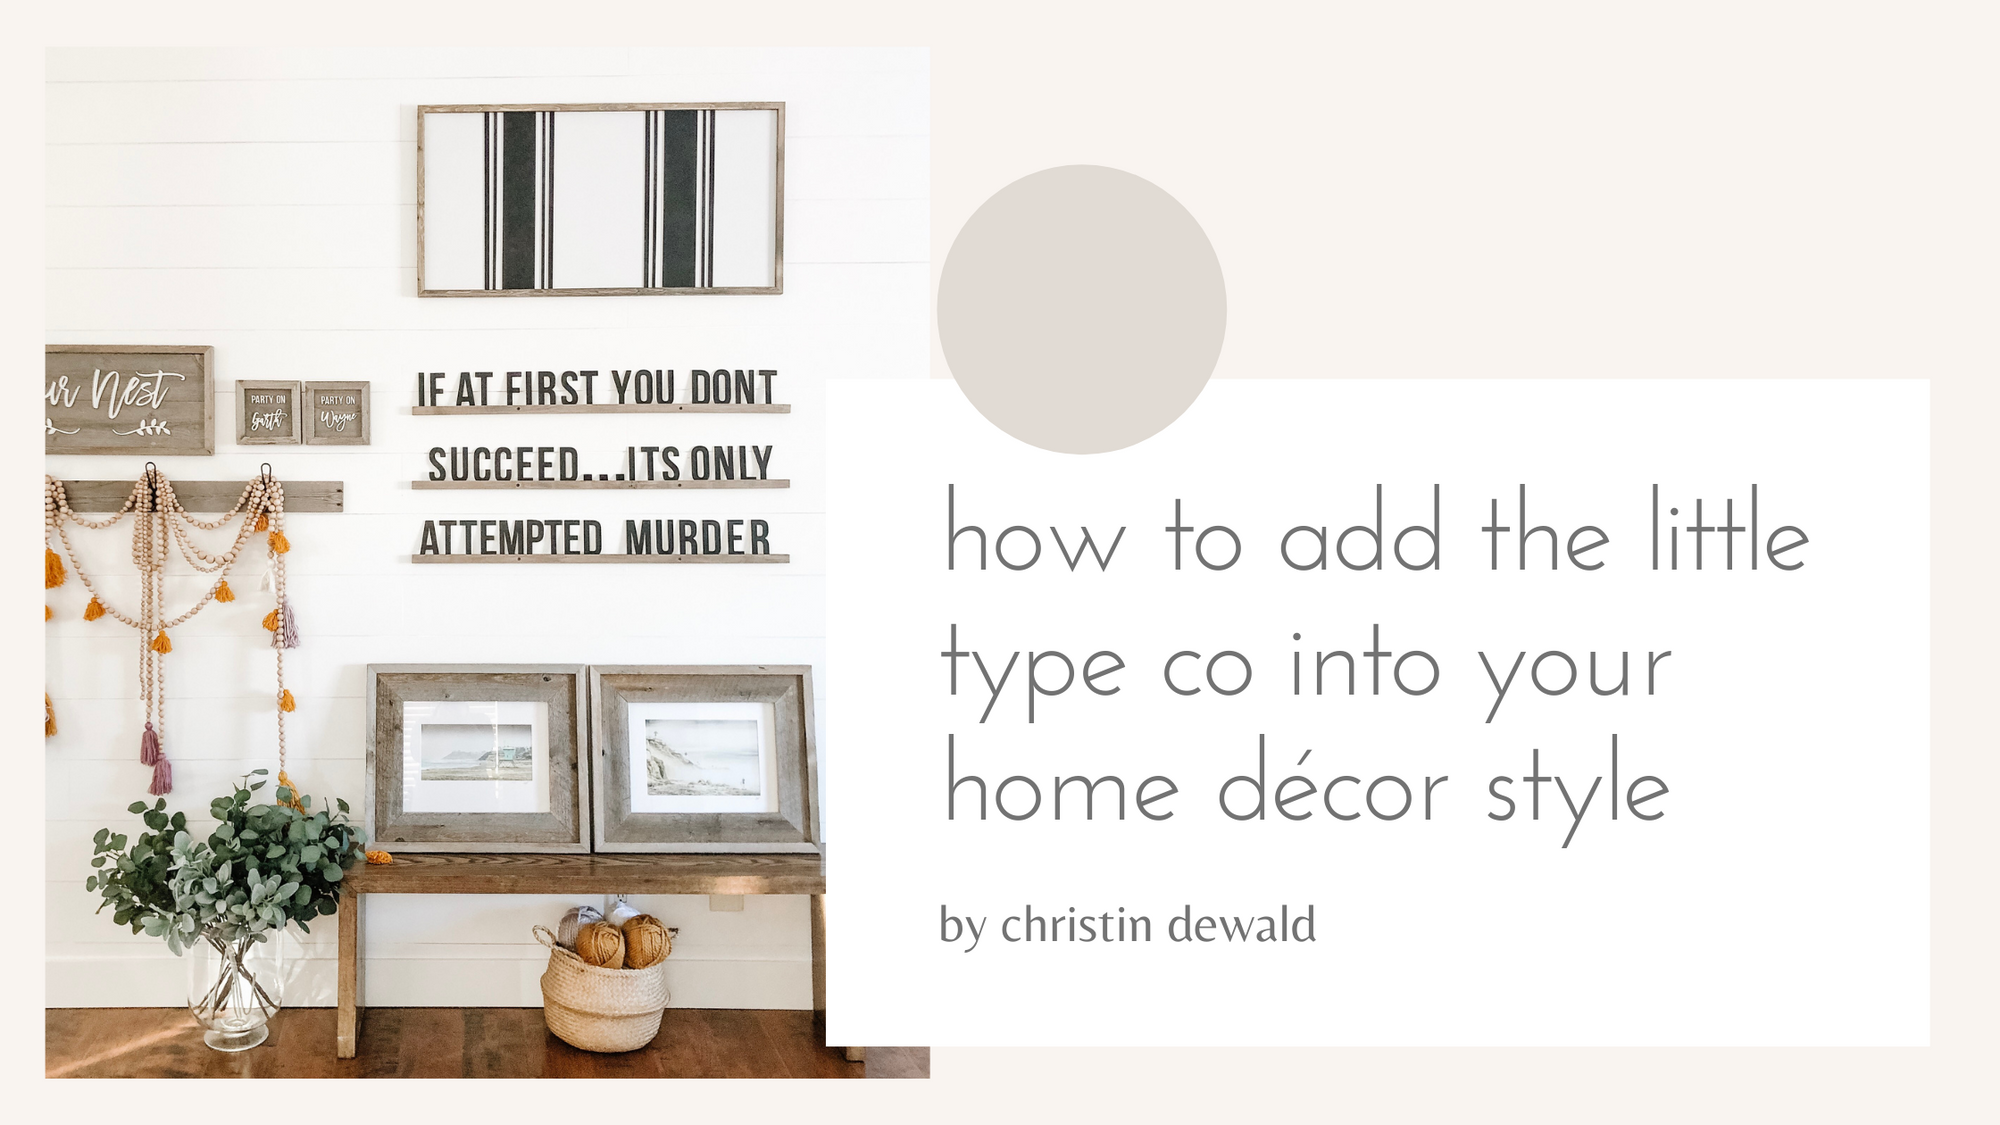 How to incorporate your little type co into your home décor style